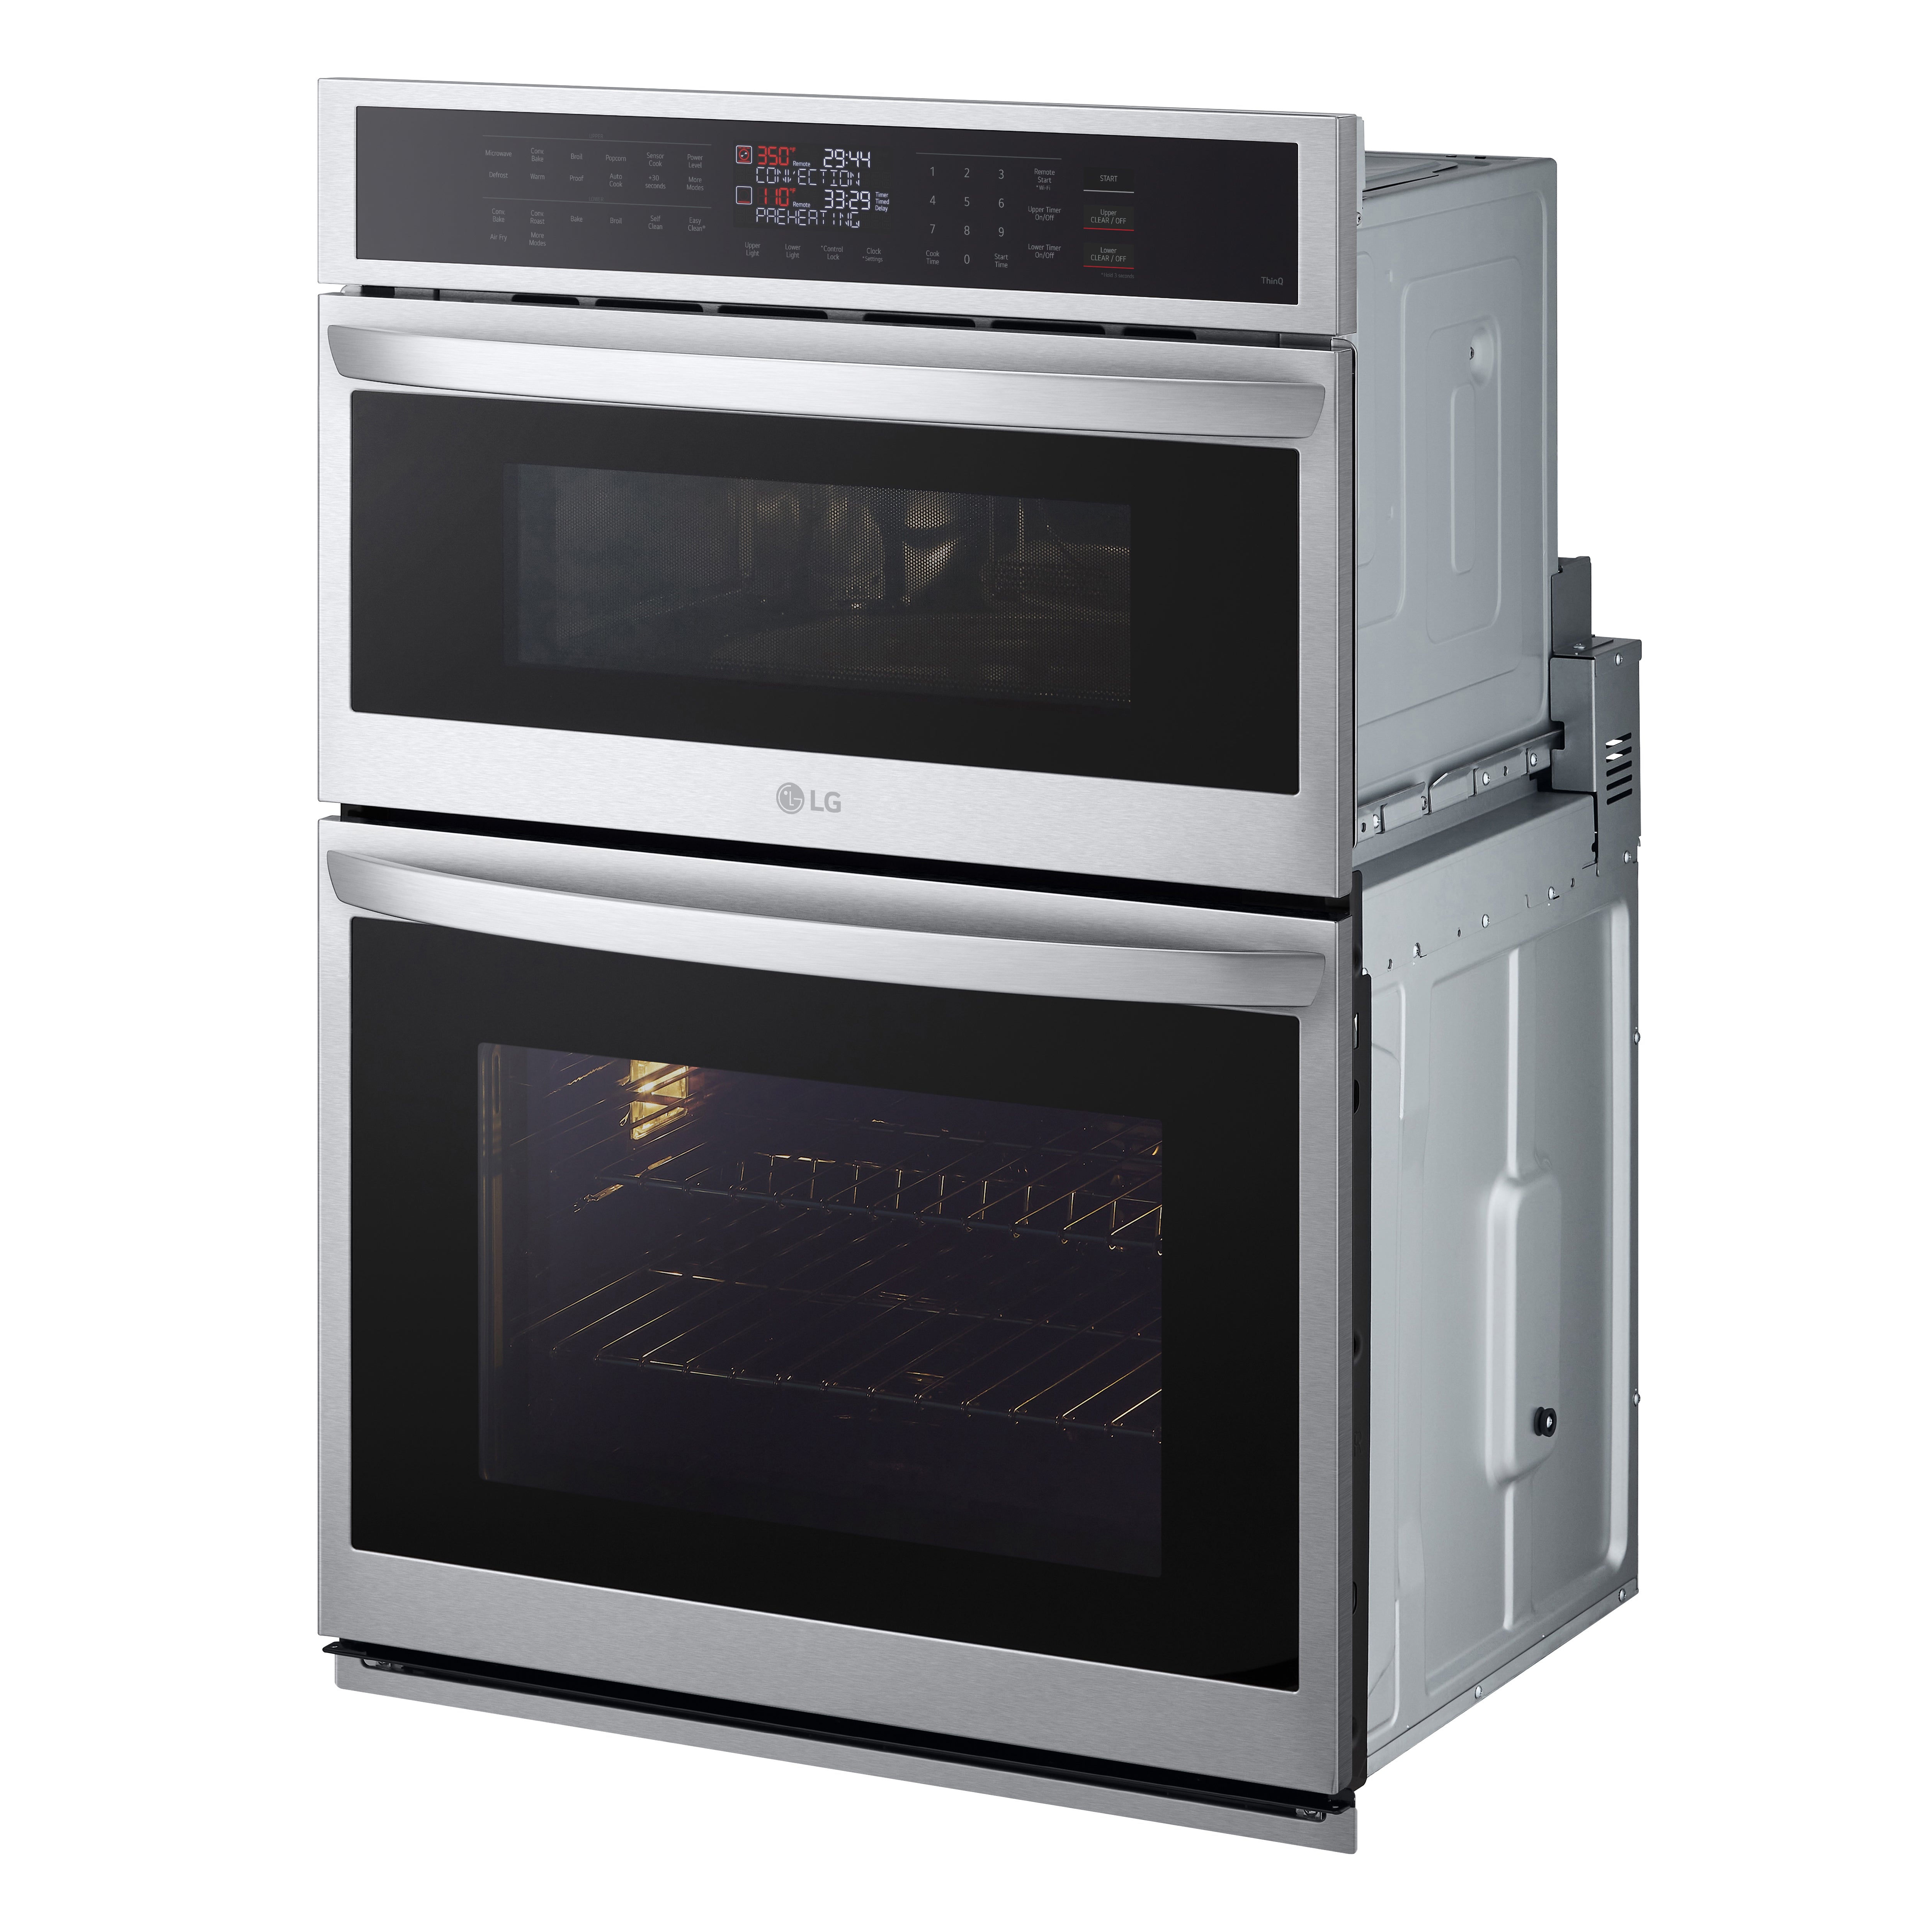 LG - 6.4 cu. ft Combination Wall Oven in Stainless - WCEP6423F